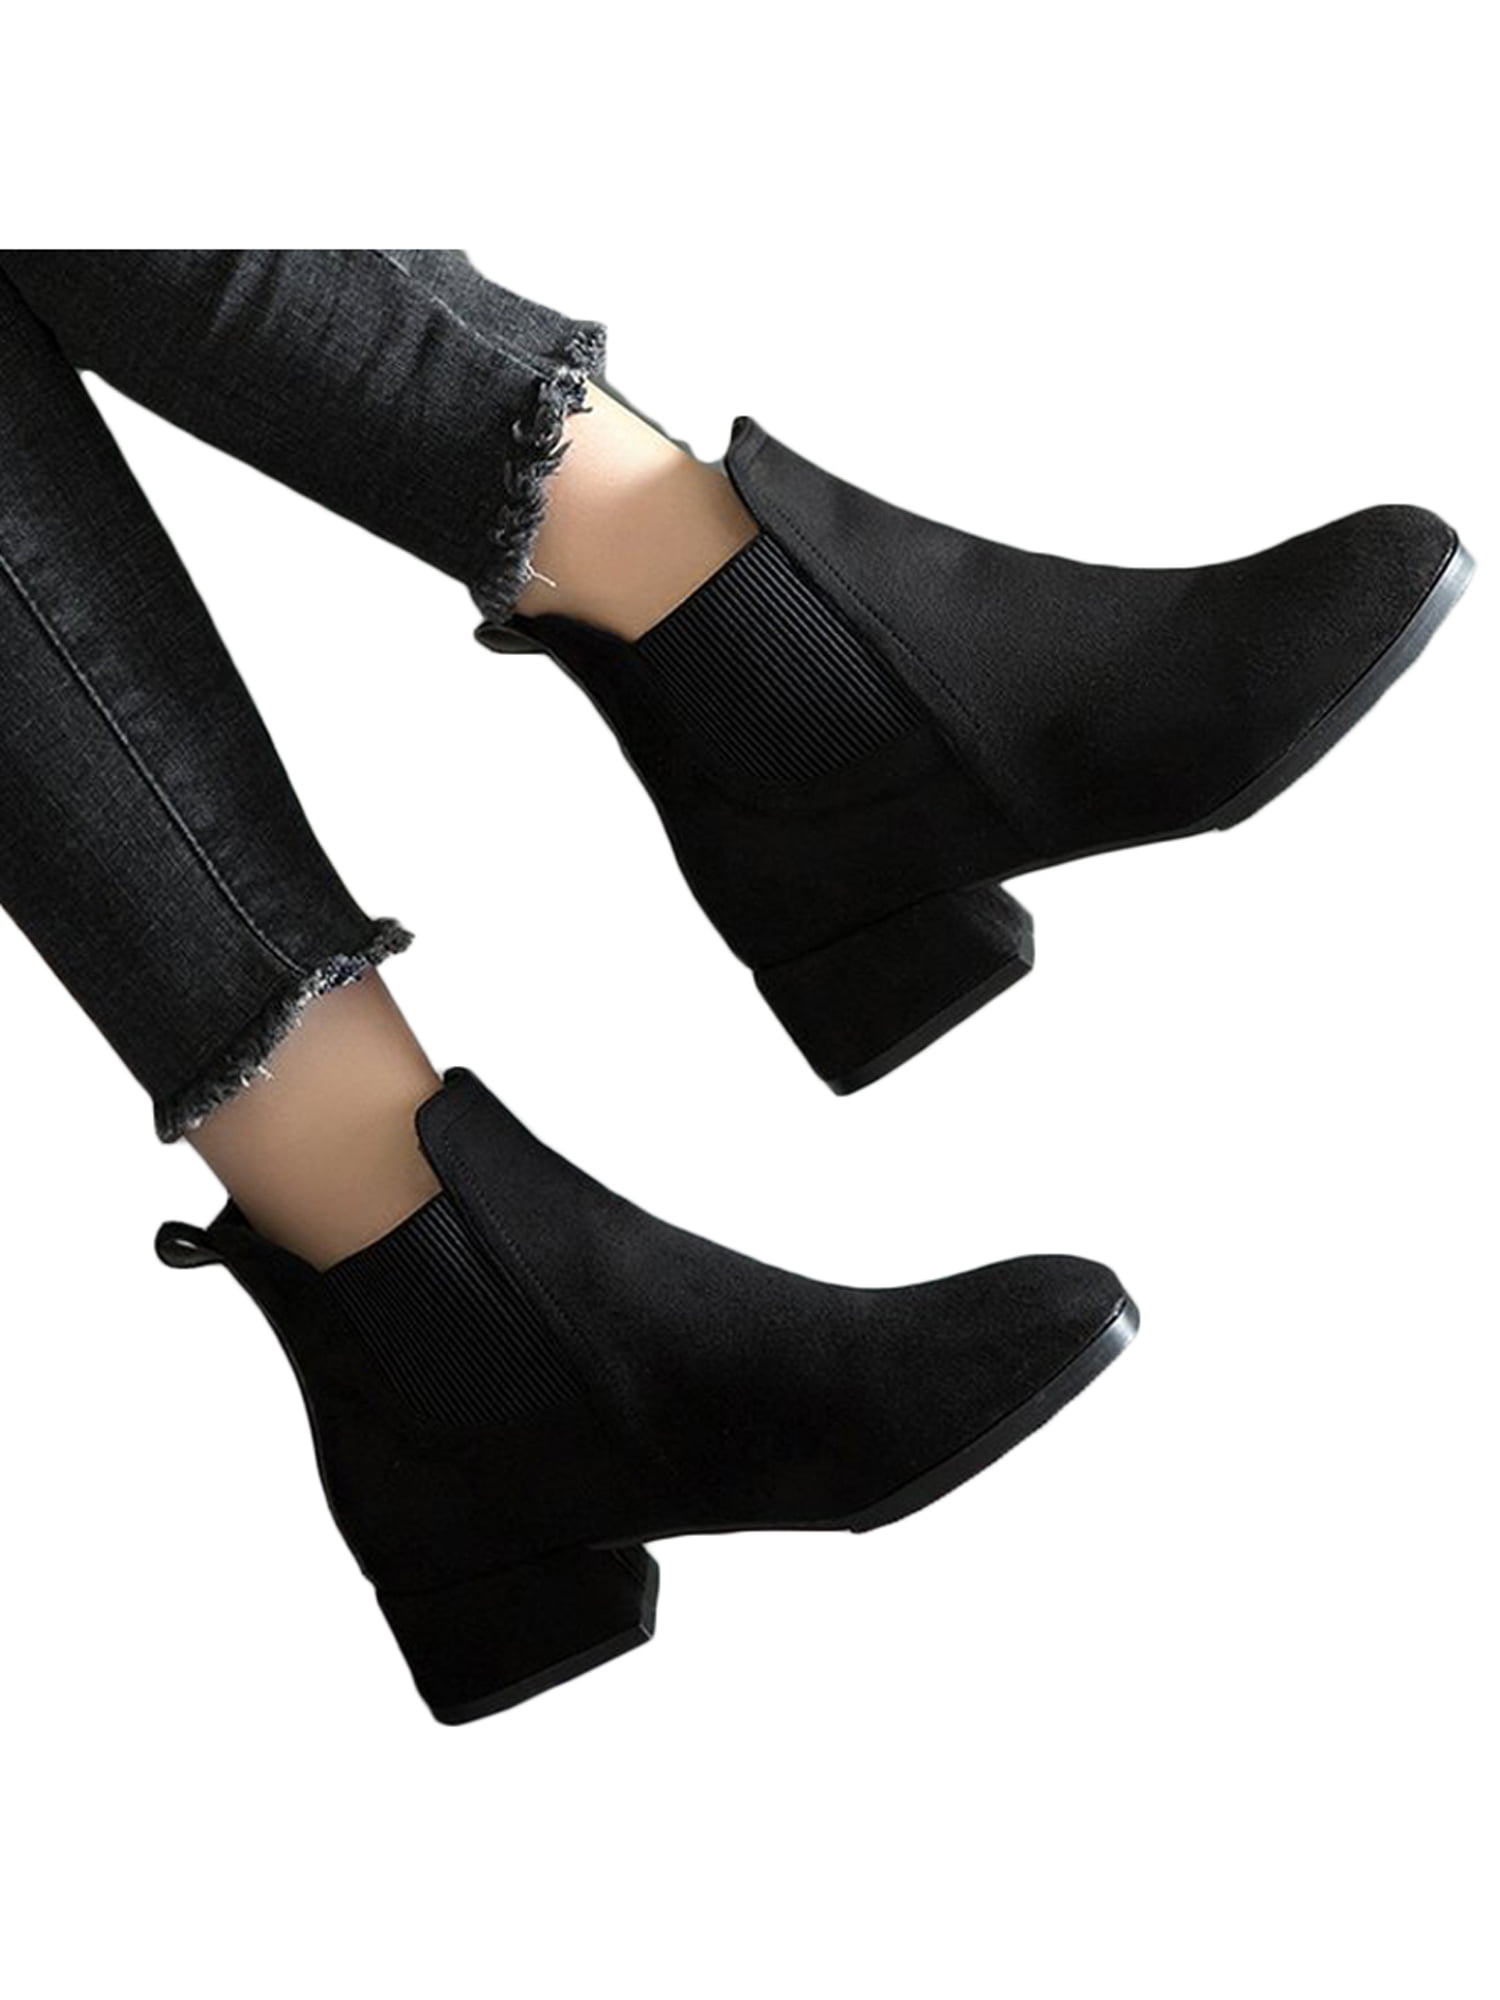 Womens Low Heel Ankle Boots Ladies Chelsea High Top Casual Riding Zip Shoes 